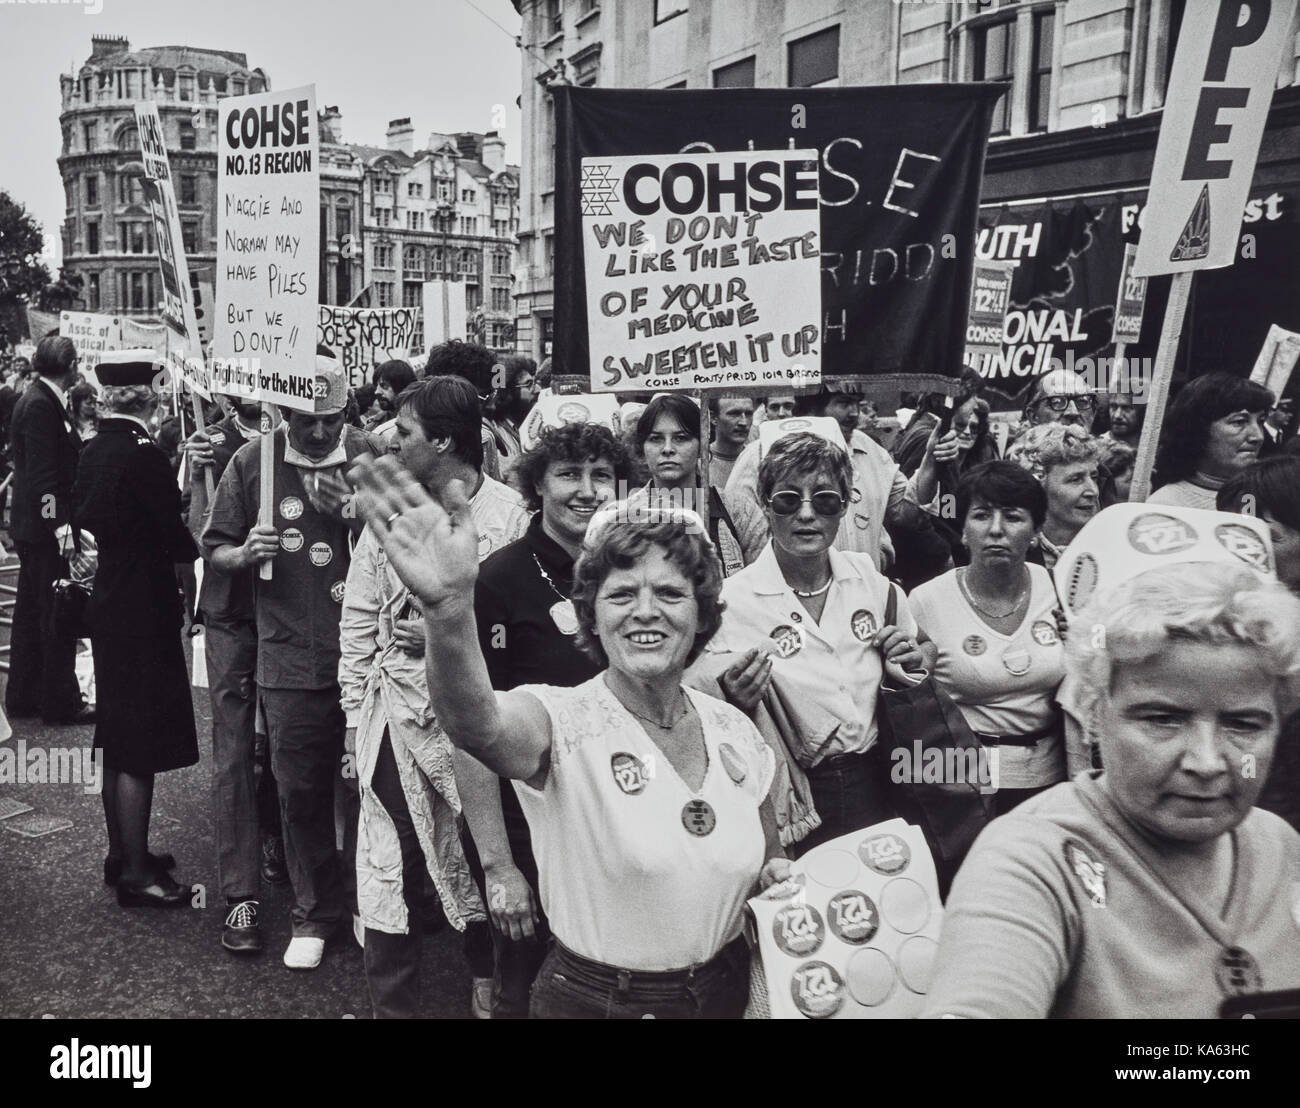 COHSE march of nurses in London on 1986 Stock Photo